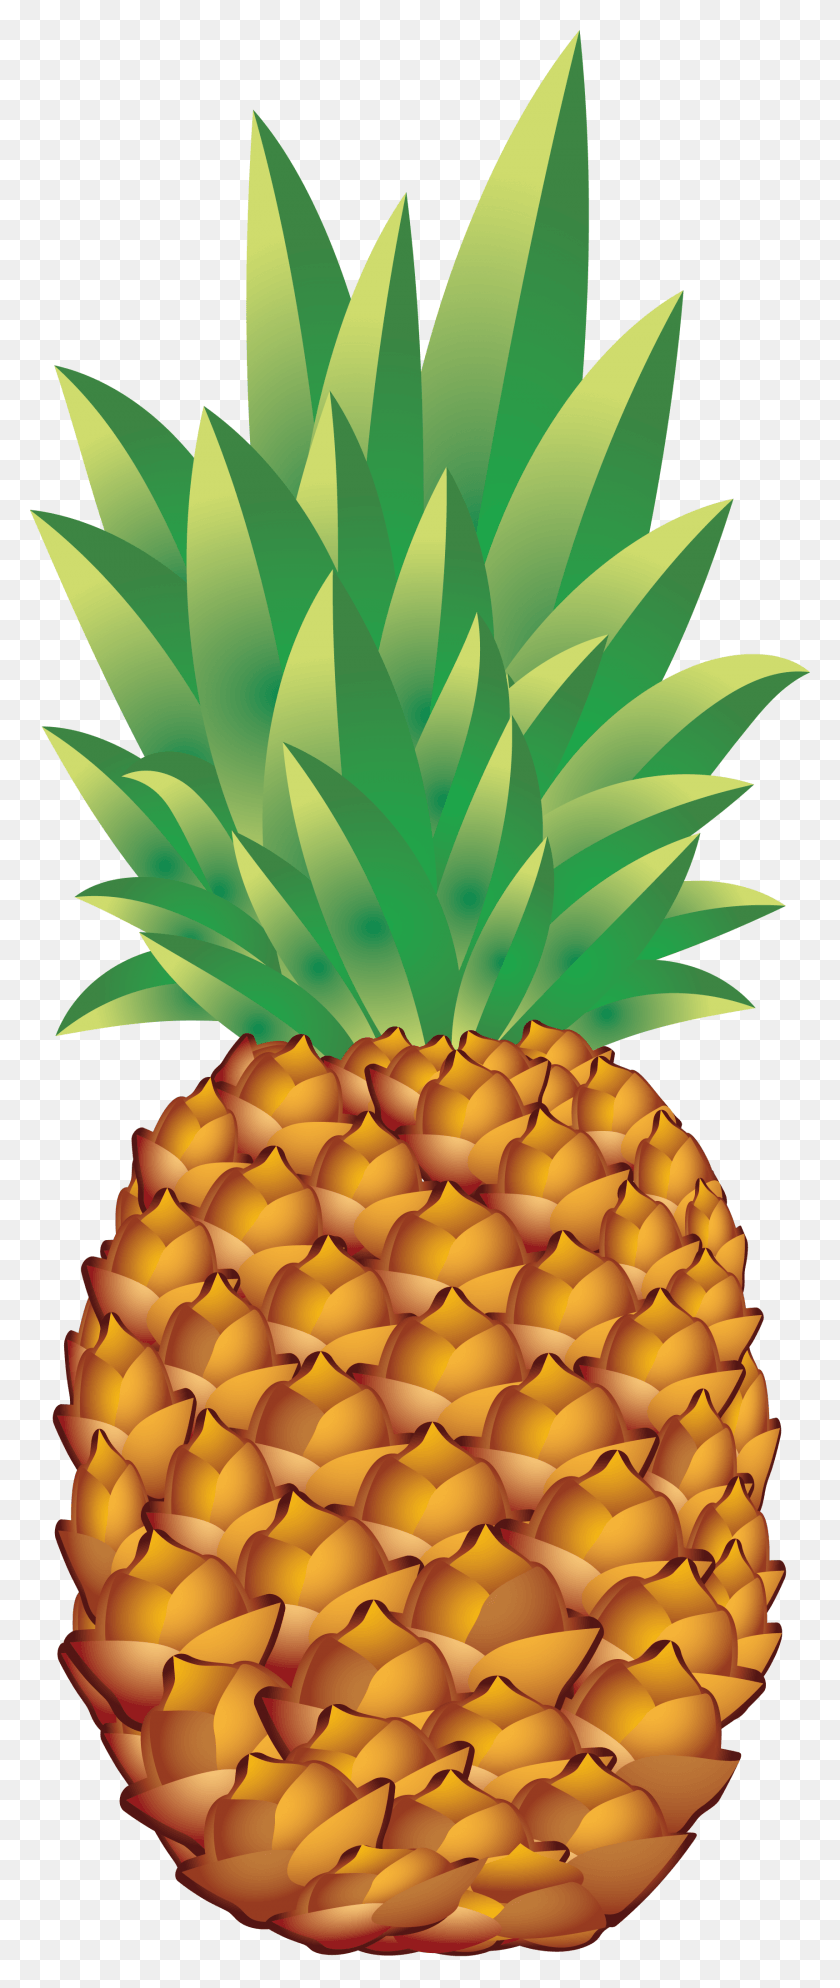 1716x4243 Tumblr Pineapple Food Photo Apple Pen Clip Pineapple Vector, Plant, Fruit HD PNG Download